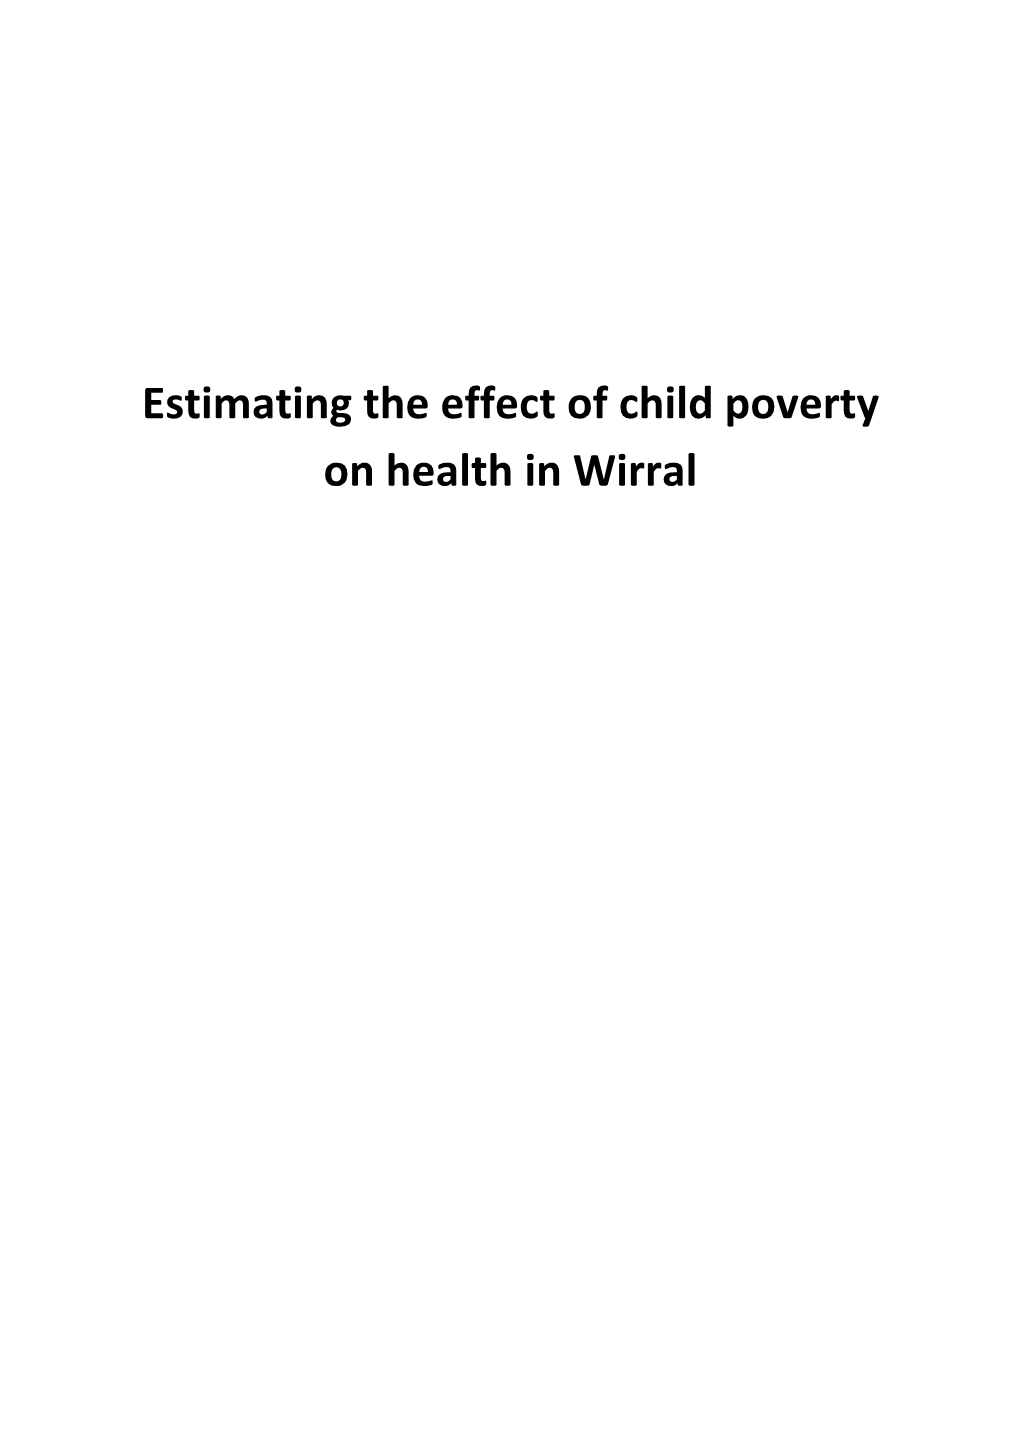 Child Poverty and Health in Wirral